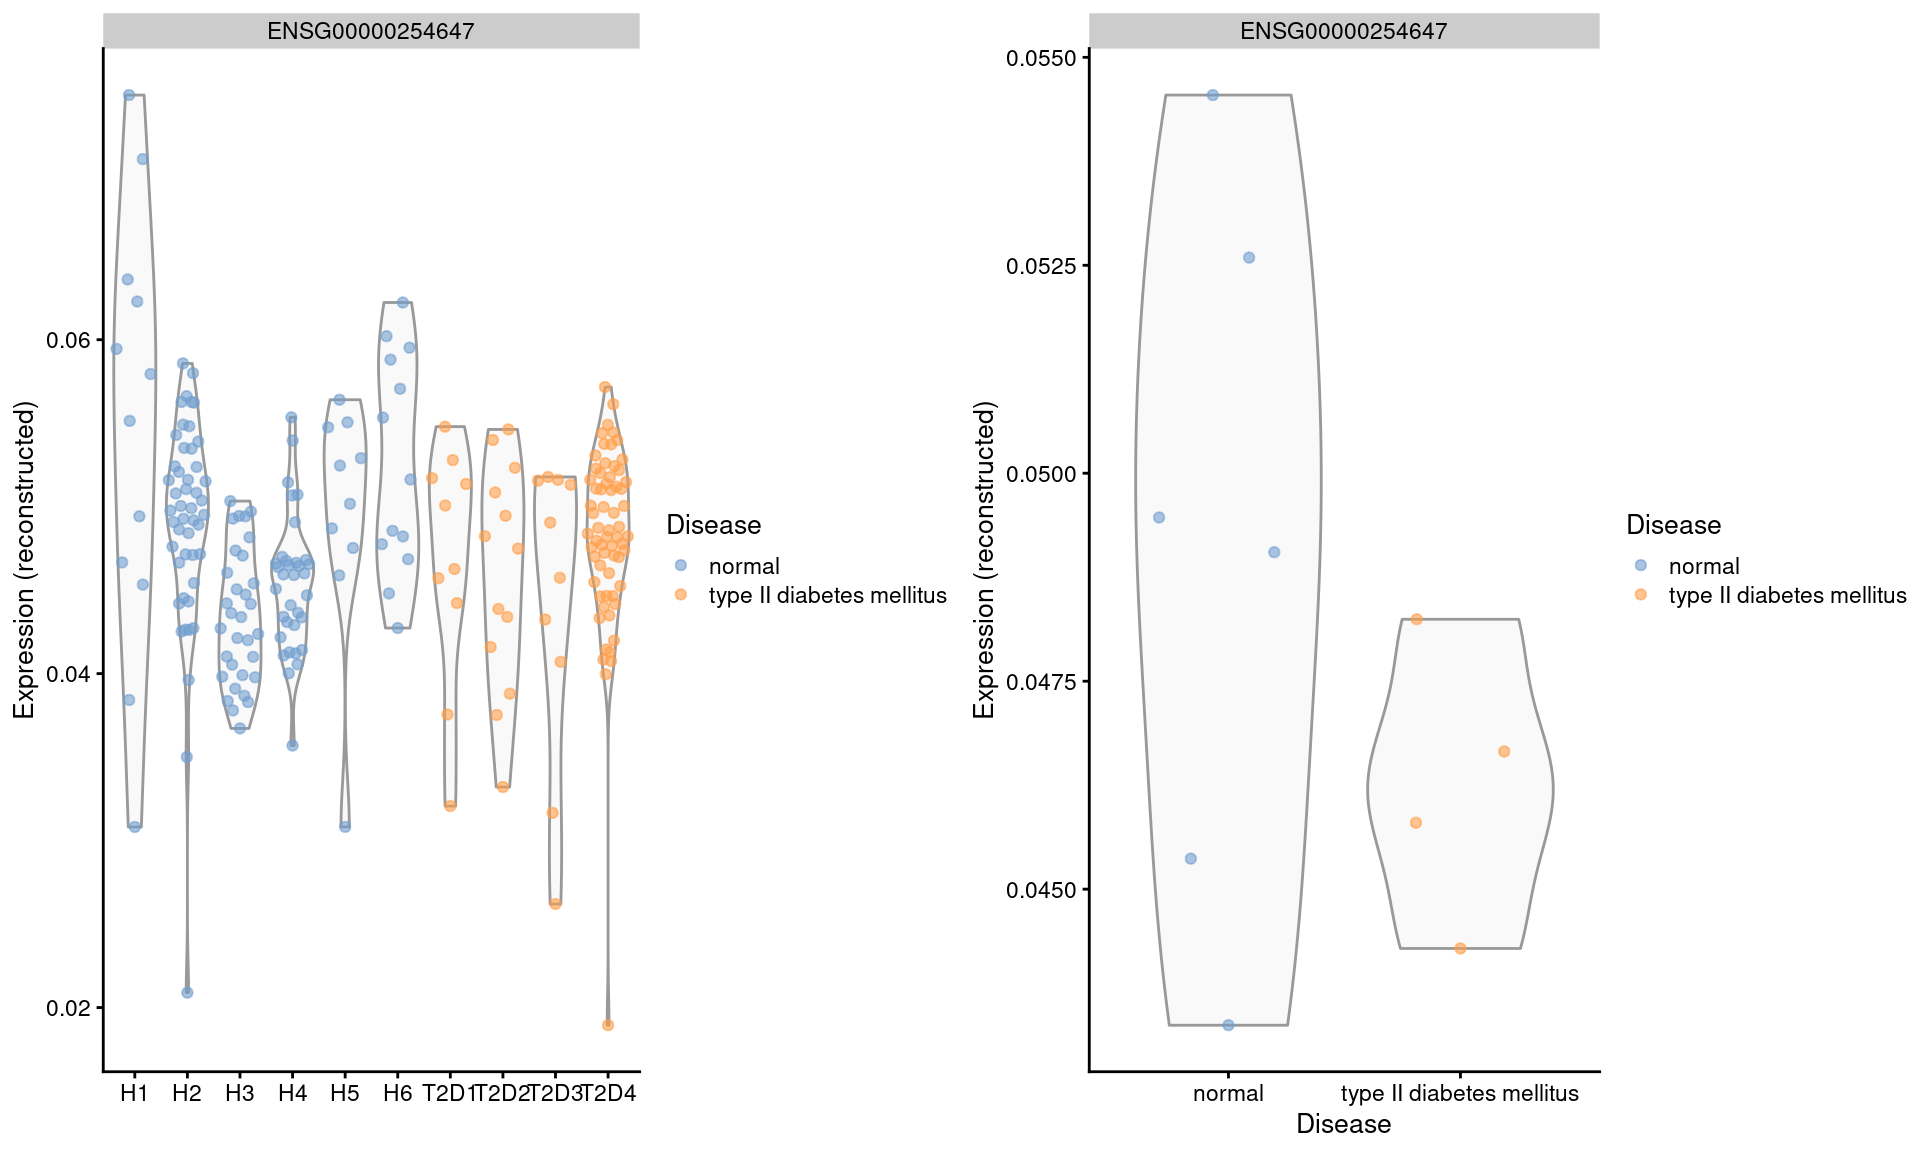 Distribution of MNN-corrected log-expression values for _INS_ in beta cells across donors in the Segerstolpe pancreas dataset. Each point represents a cell in each donor (left) or the average of all cells in each donor (right), and is colored according to disease status of the donor.